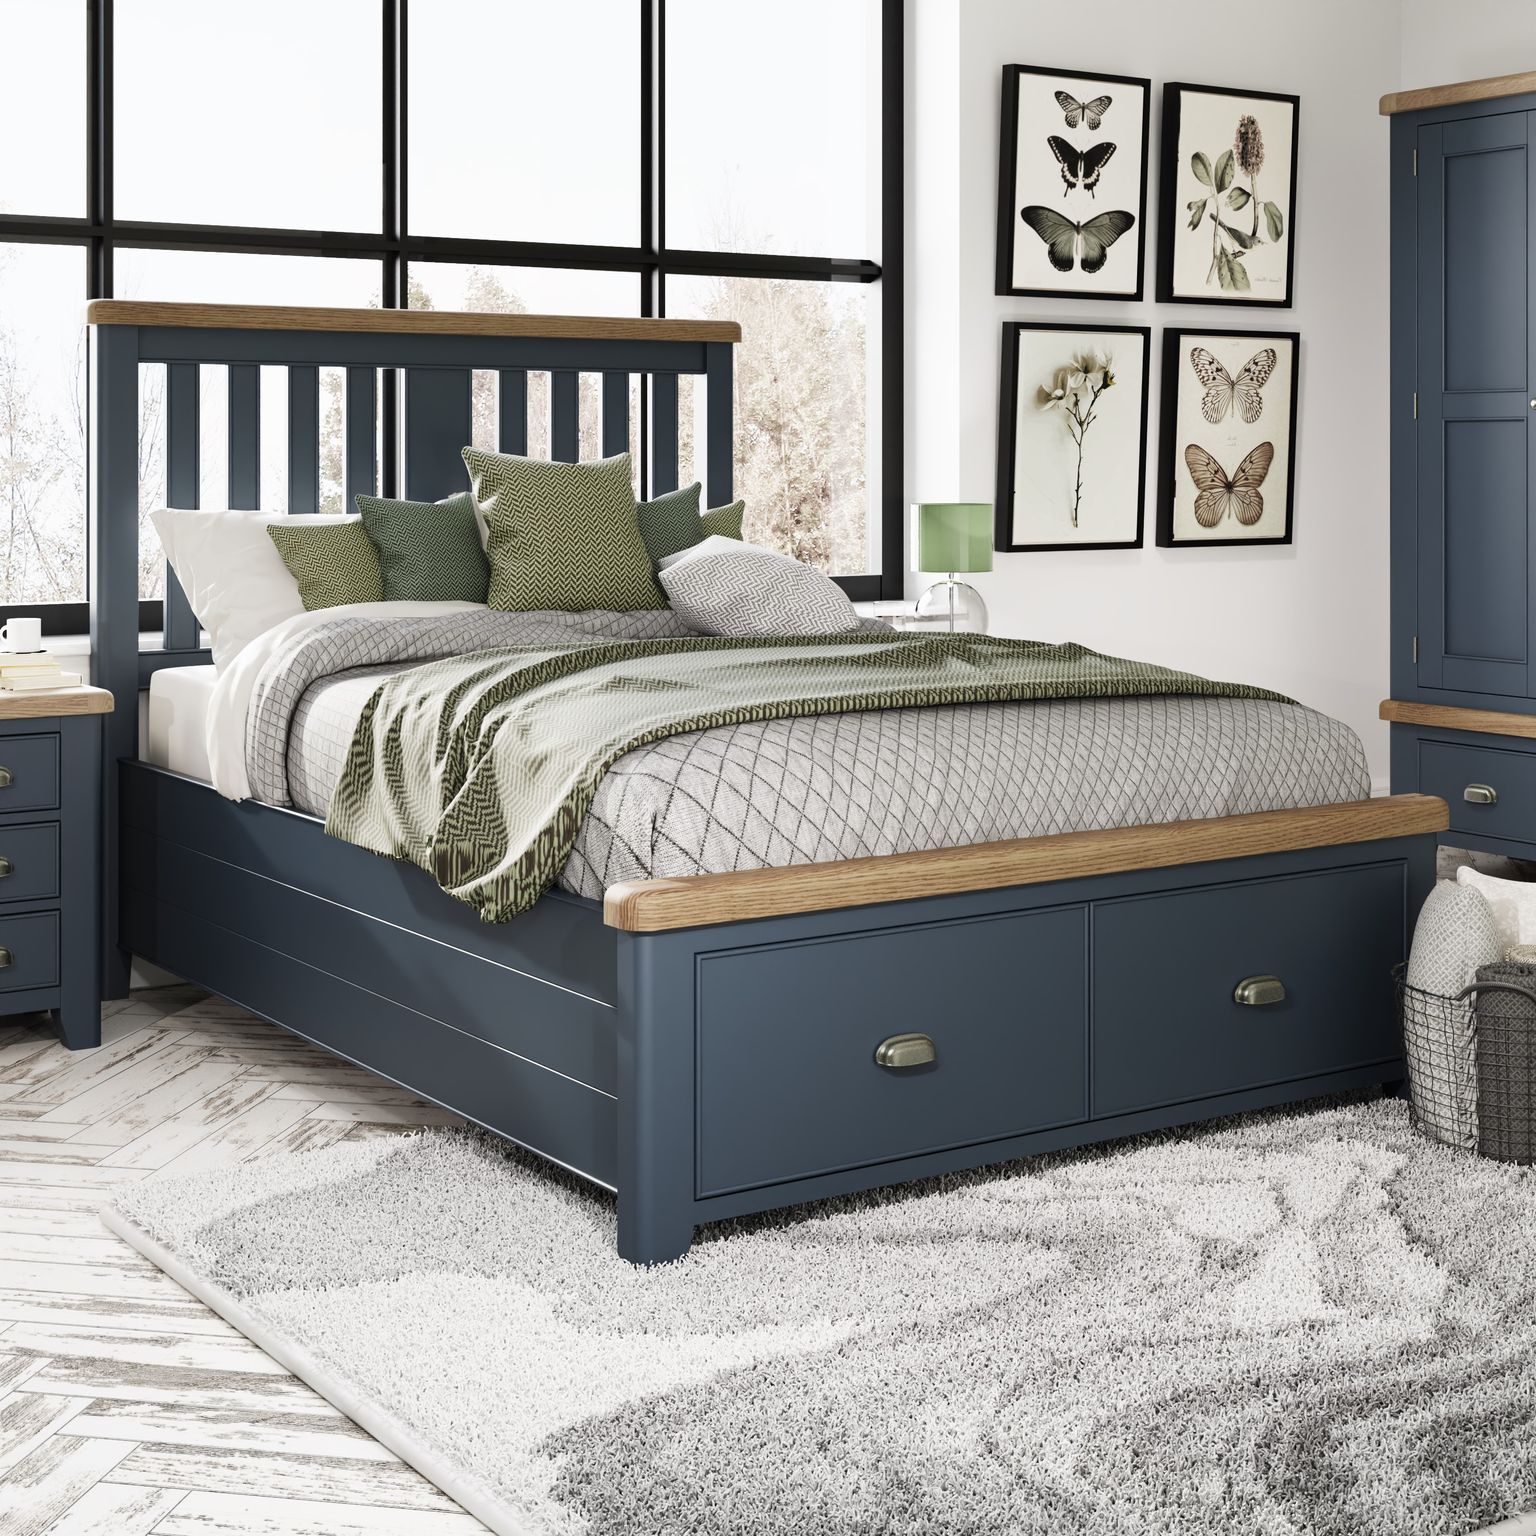 HOP Blue Bed with slatted Headboard and Drawer Footboard 4'6